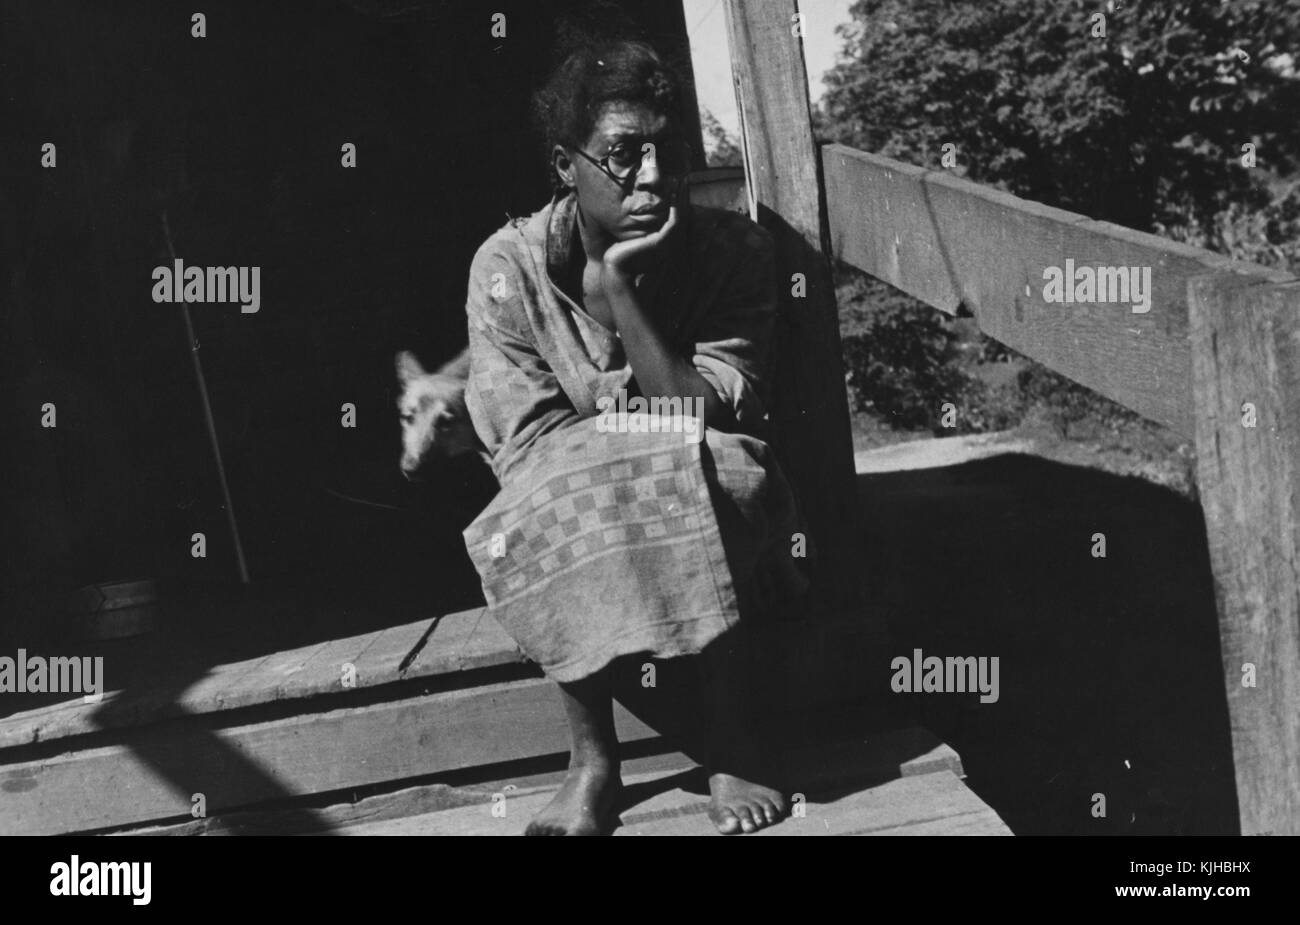 A photograph of a woman wearing a simple patterned dress, she is sitting on her wooden porch while she waits for a relief agent from the Farm Service Agency to meet with her, the FSA was working at the time to improve the lives of farmers around the country, her dog is coming out of the house behind her, Scott's Run, West Virginia, 1935. From the New York Public Library. Stock Photo